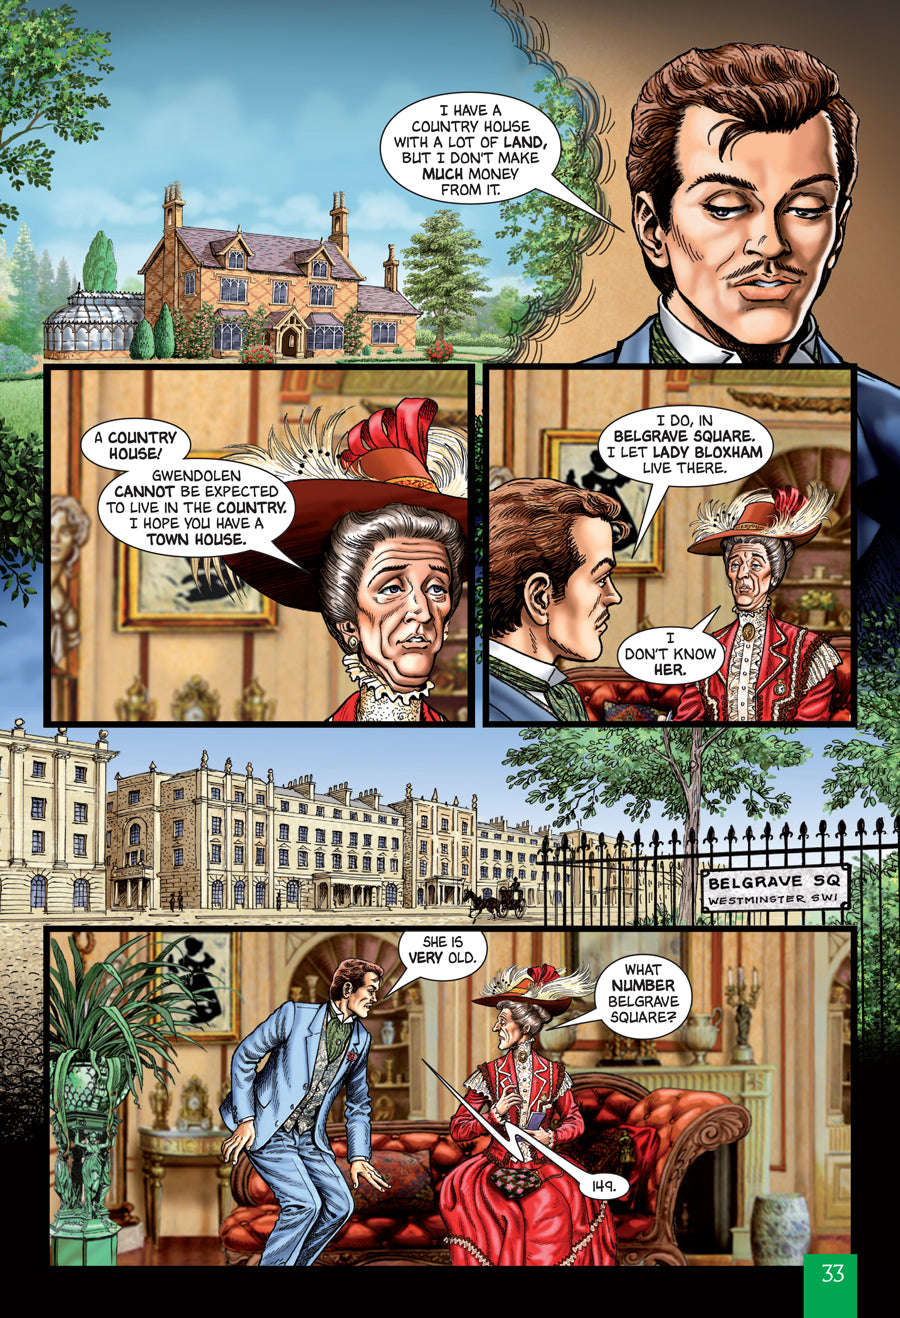 A sample Quick Text interior page from The Importance of Being Earnest.